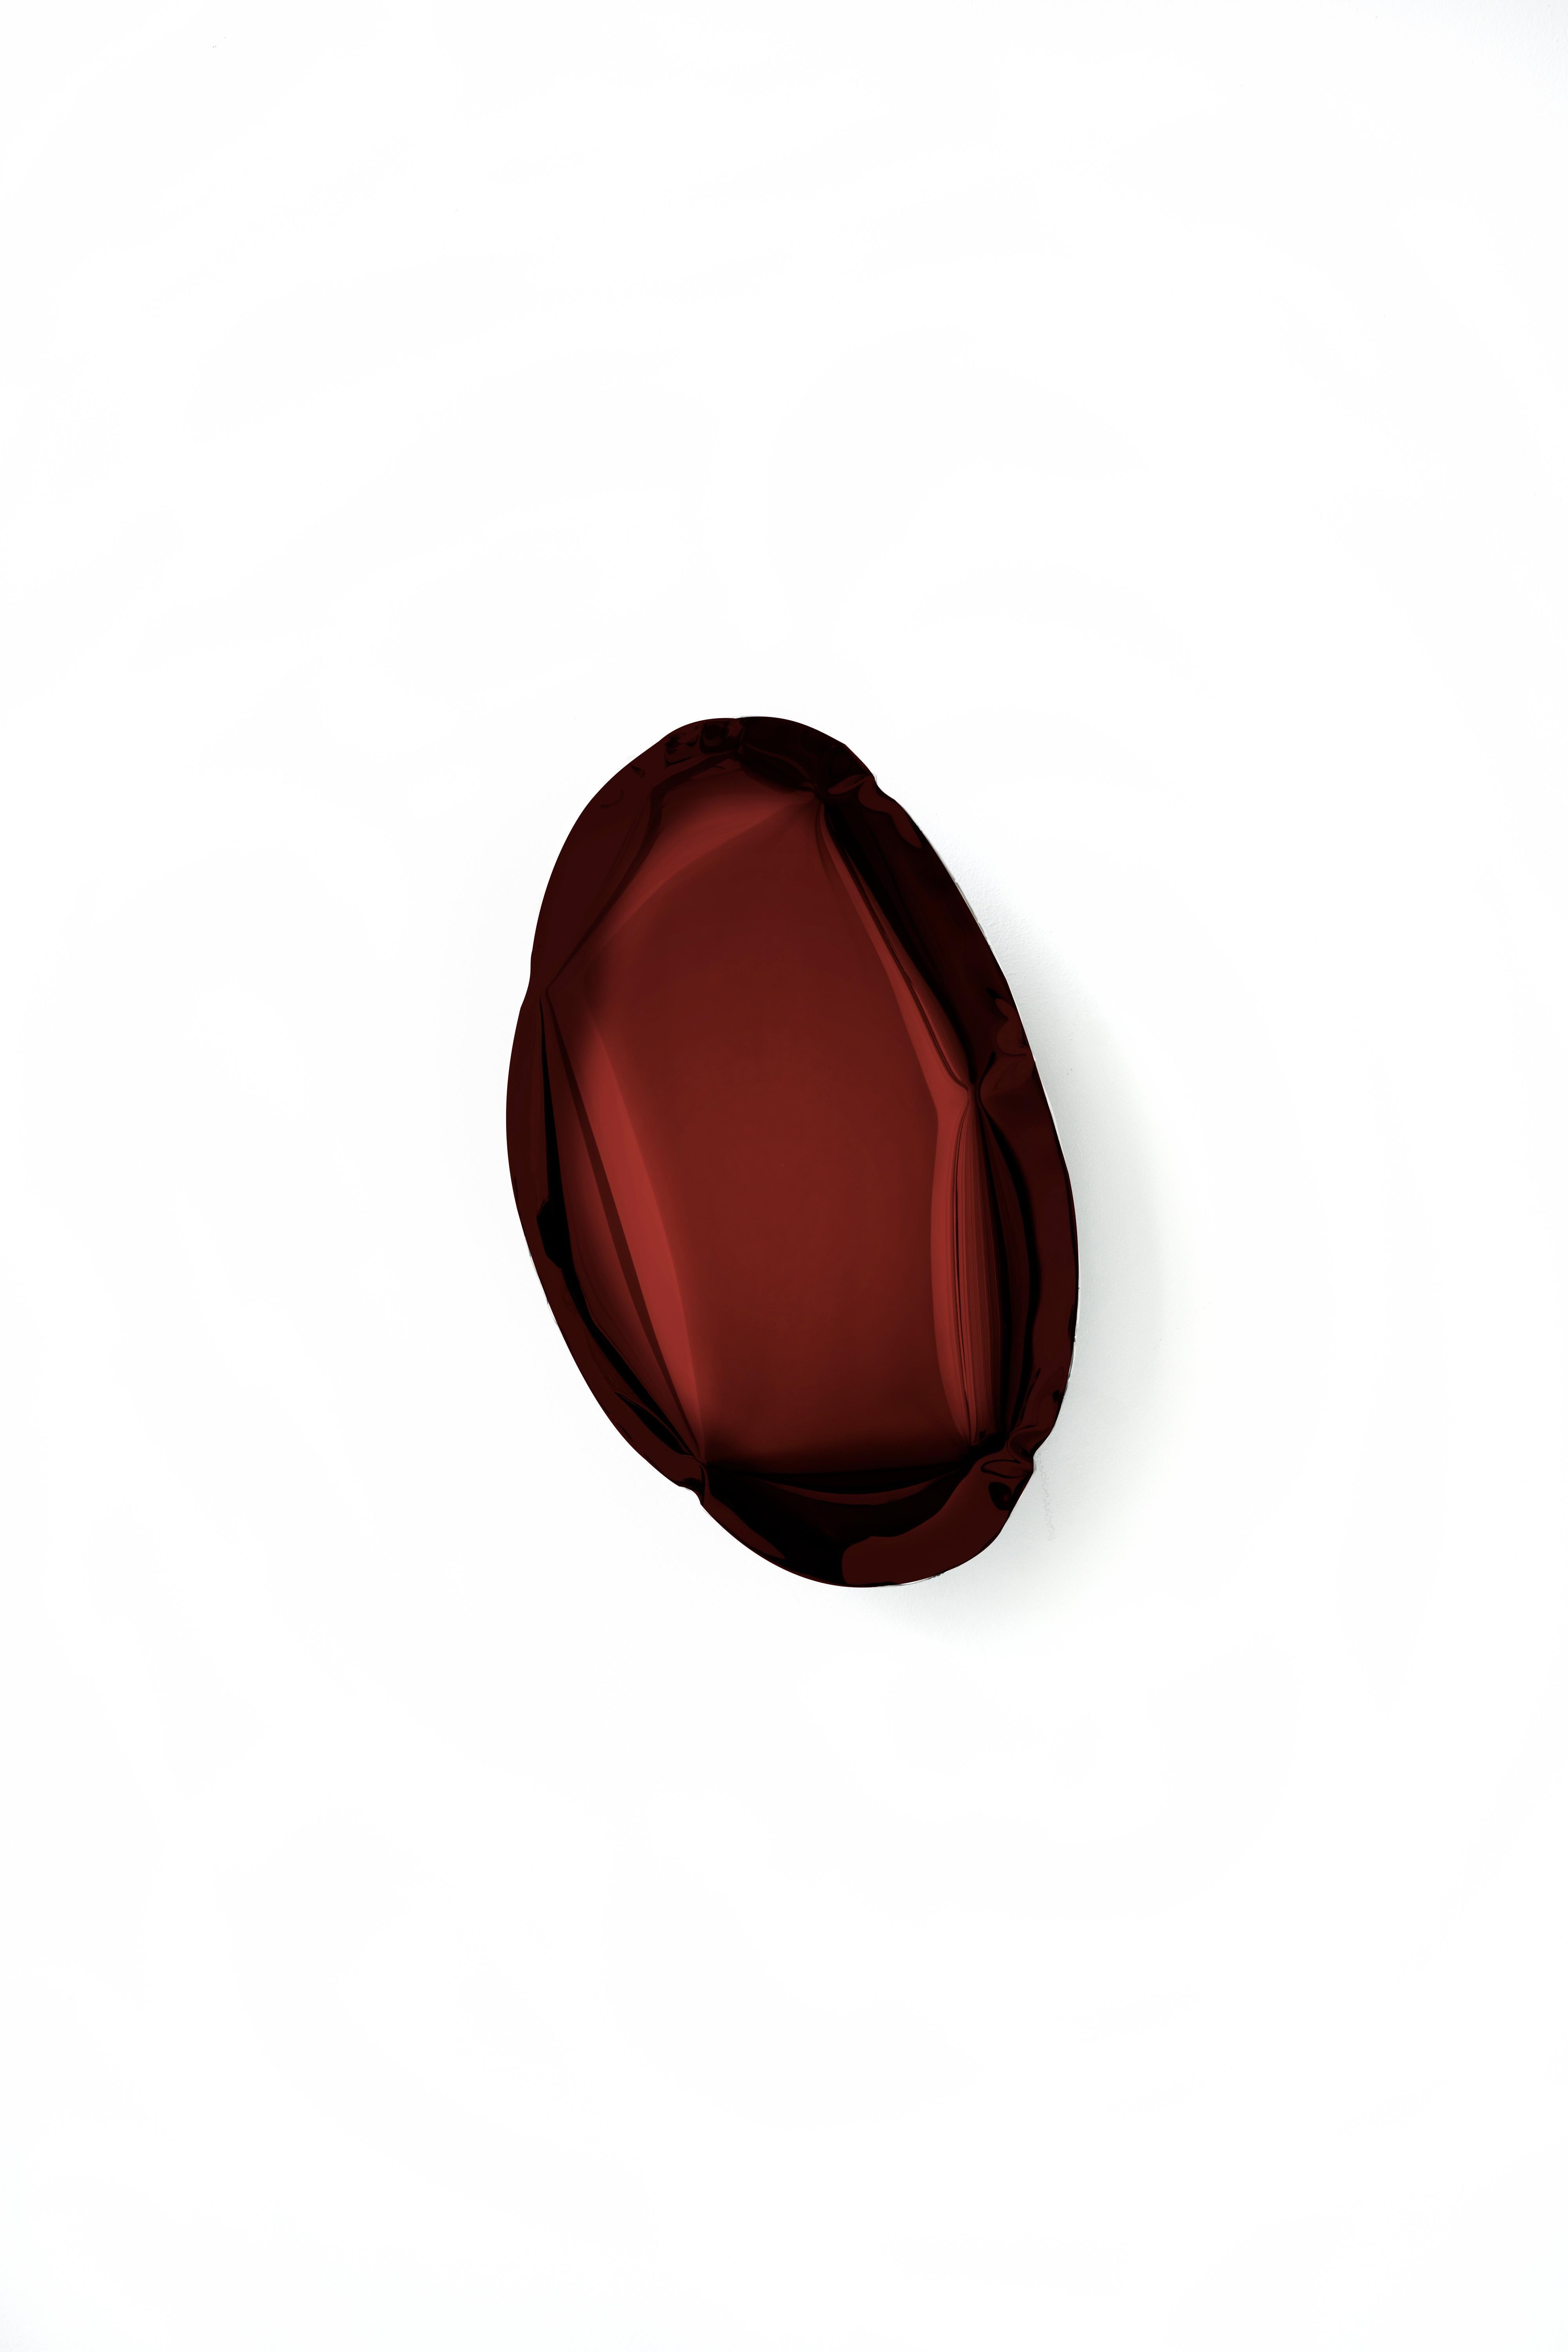 Contemporary Mirror Tafla O2 Rubin Red, in Polished Stainless Steel by Zieta For Sale